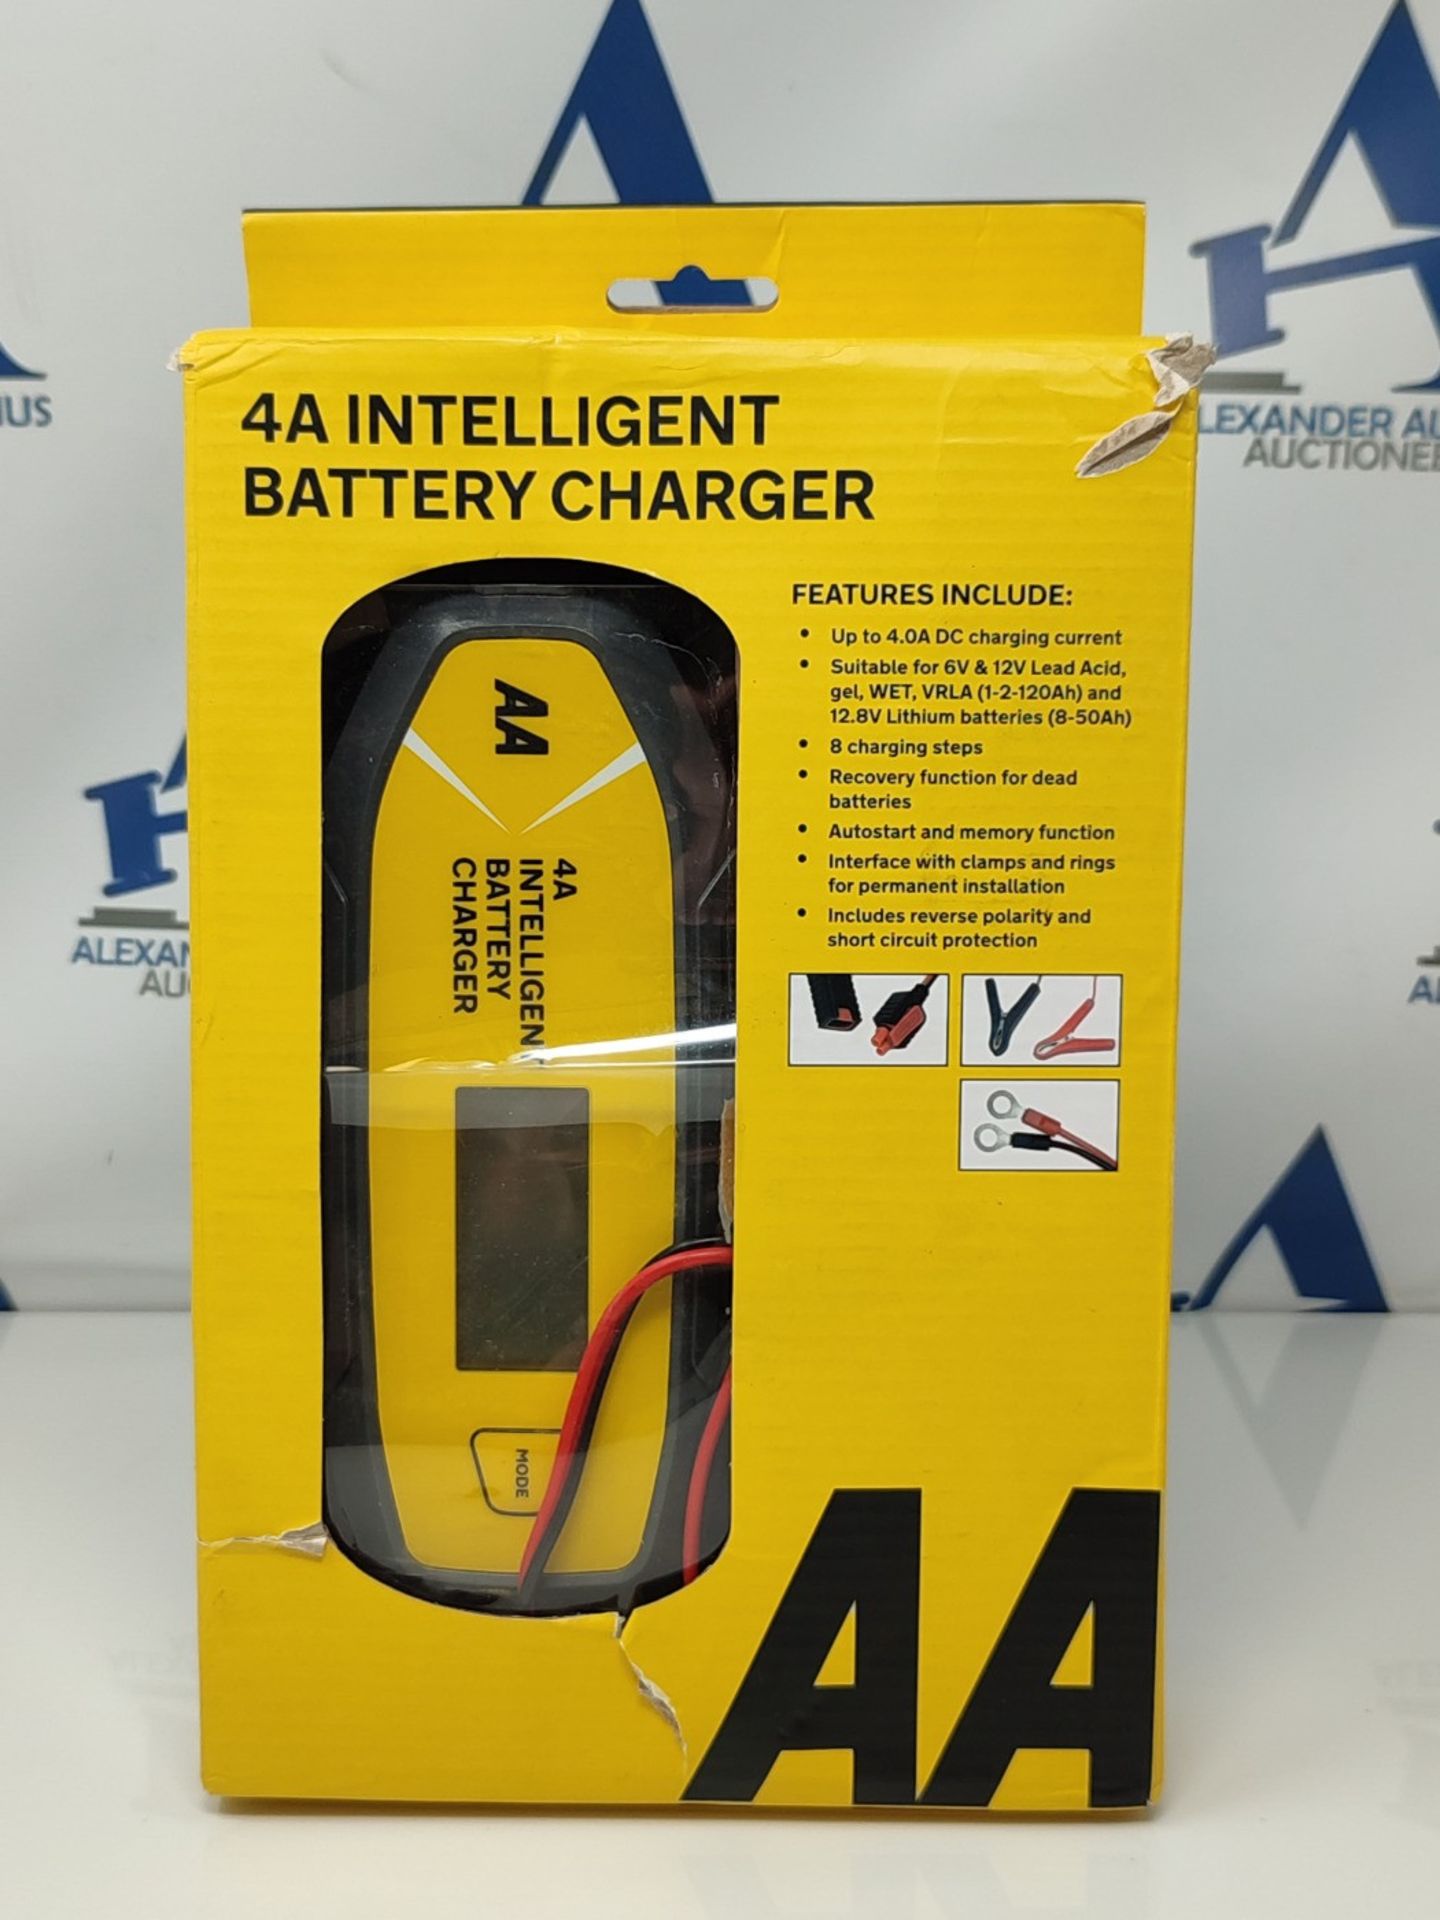 AA AA0725 4A Intelligent Car Battery Charger - LCD,8 Stage, Recover Dead Battery,Up To - Image 2 of 3